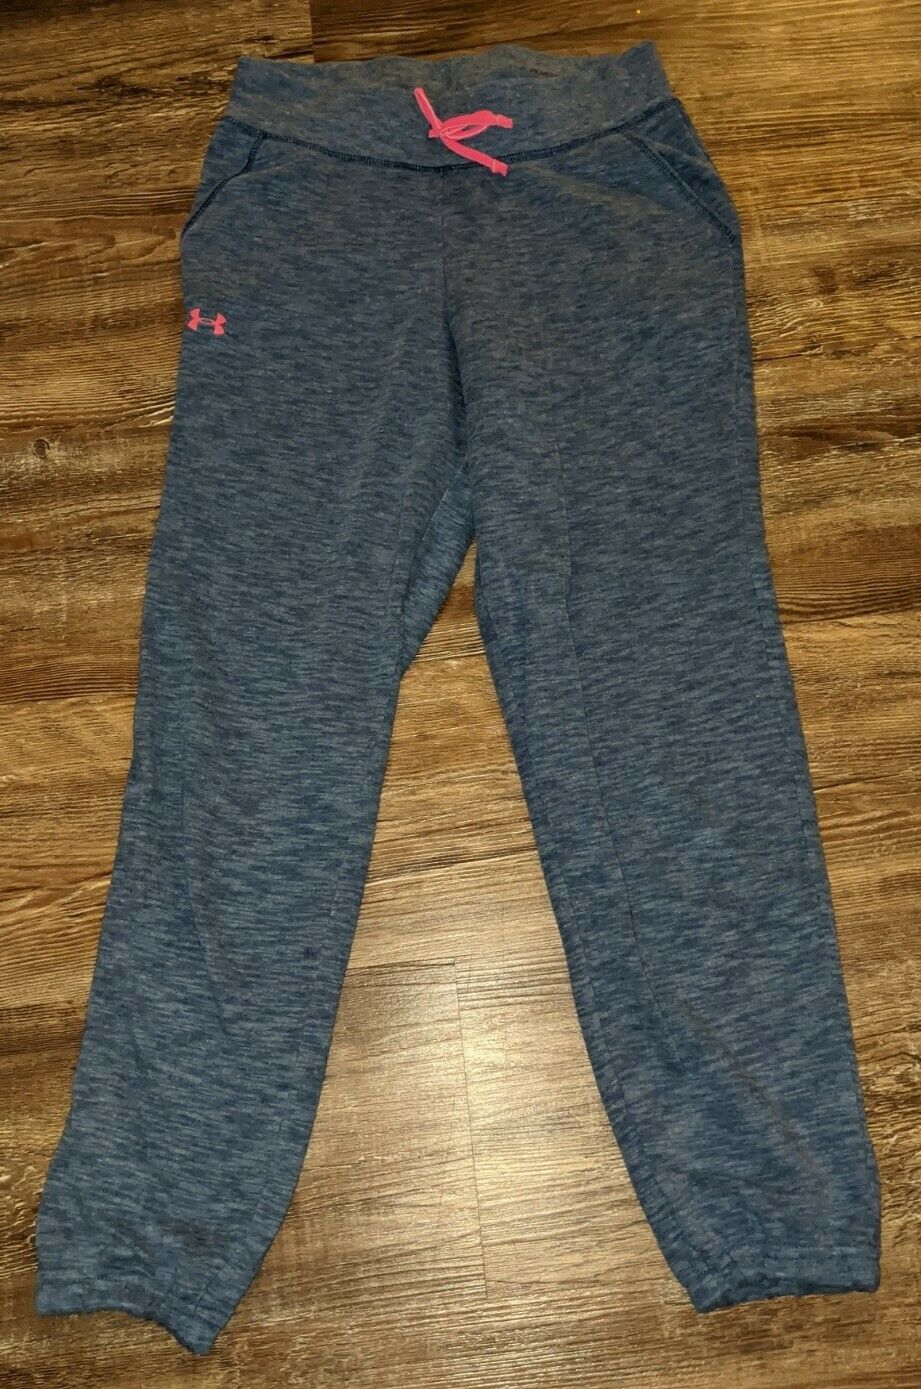 Under Armour Girls Blue Loose Fit Jogger Sweatpants Size Youth Medium